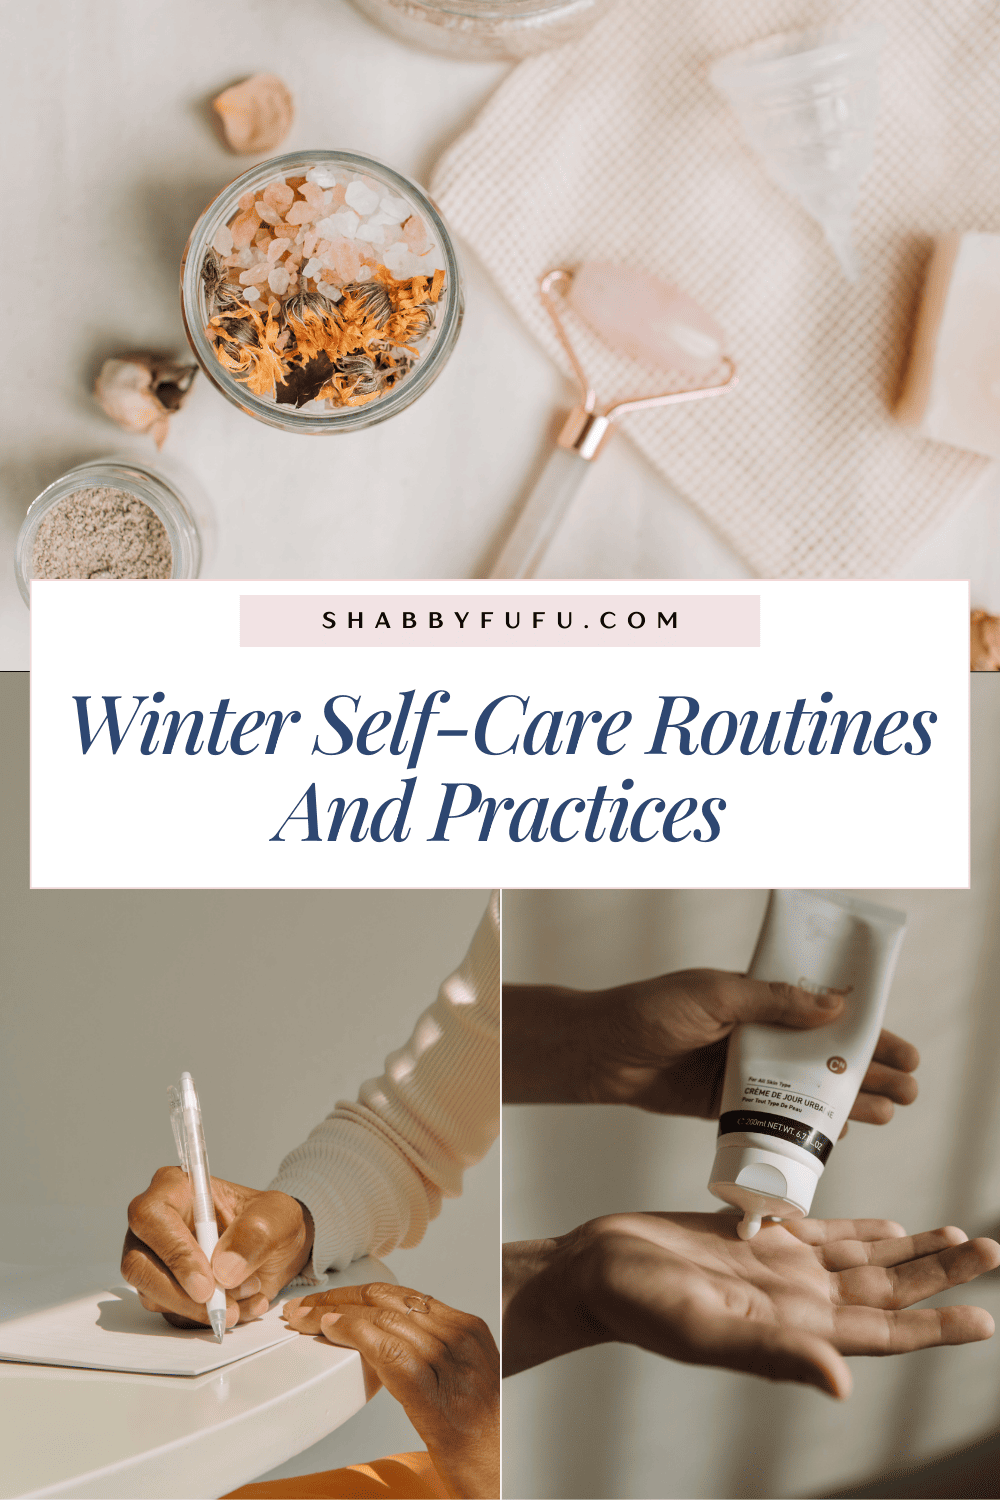 Decorative Pinterest graphic with lifestyle collage images titled "Winter self-care routines and practices"